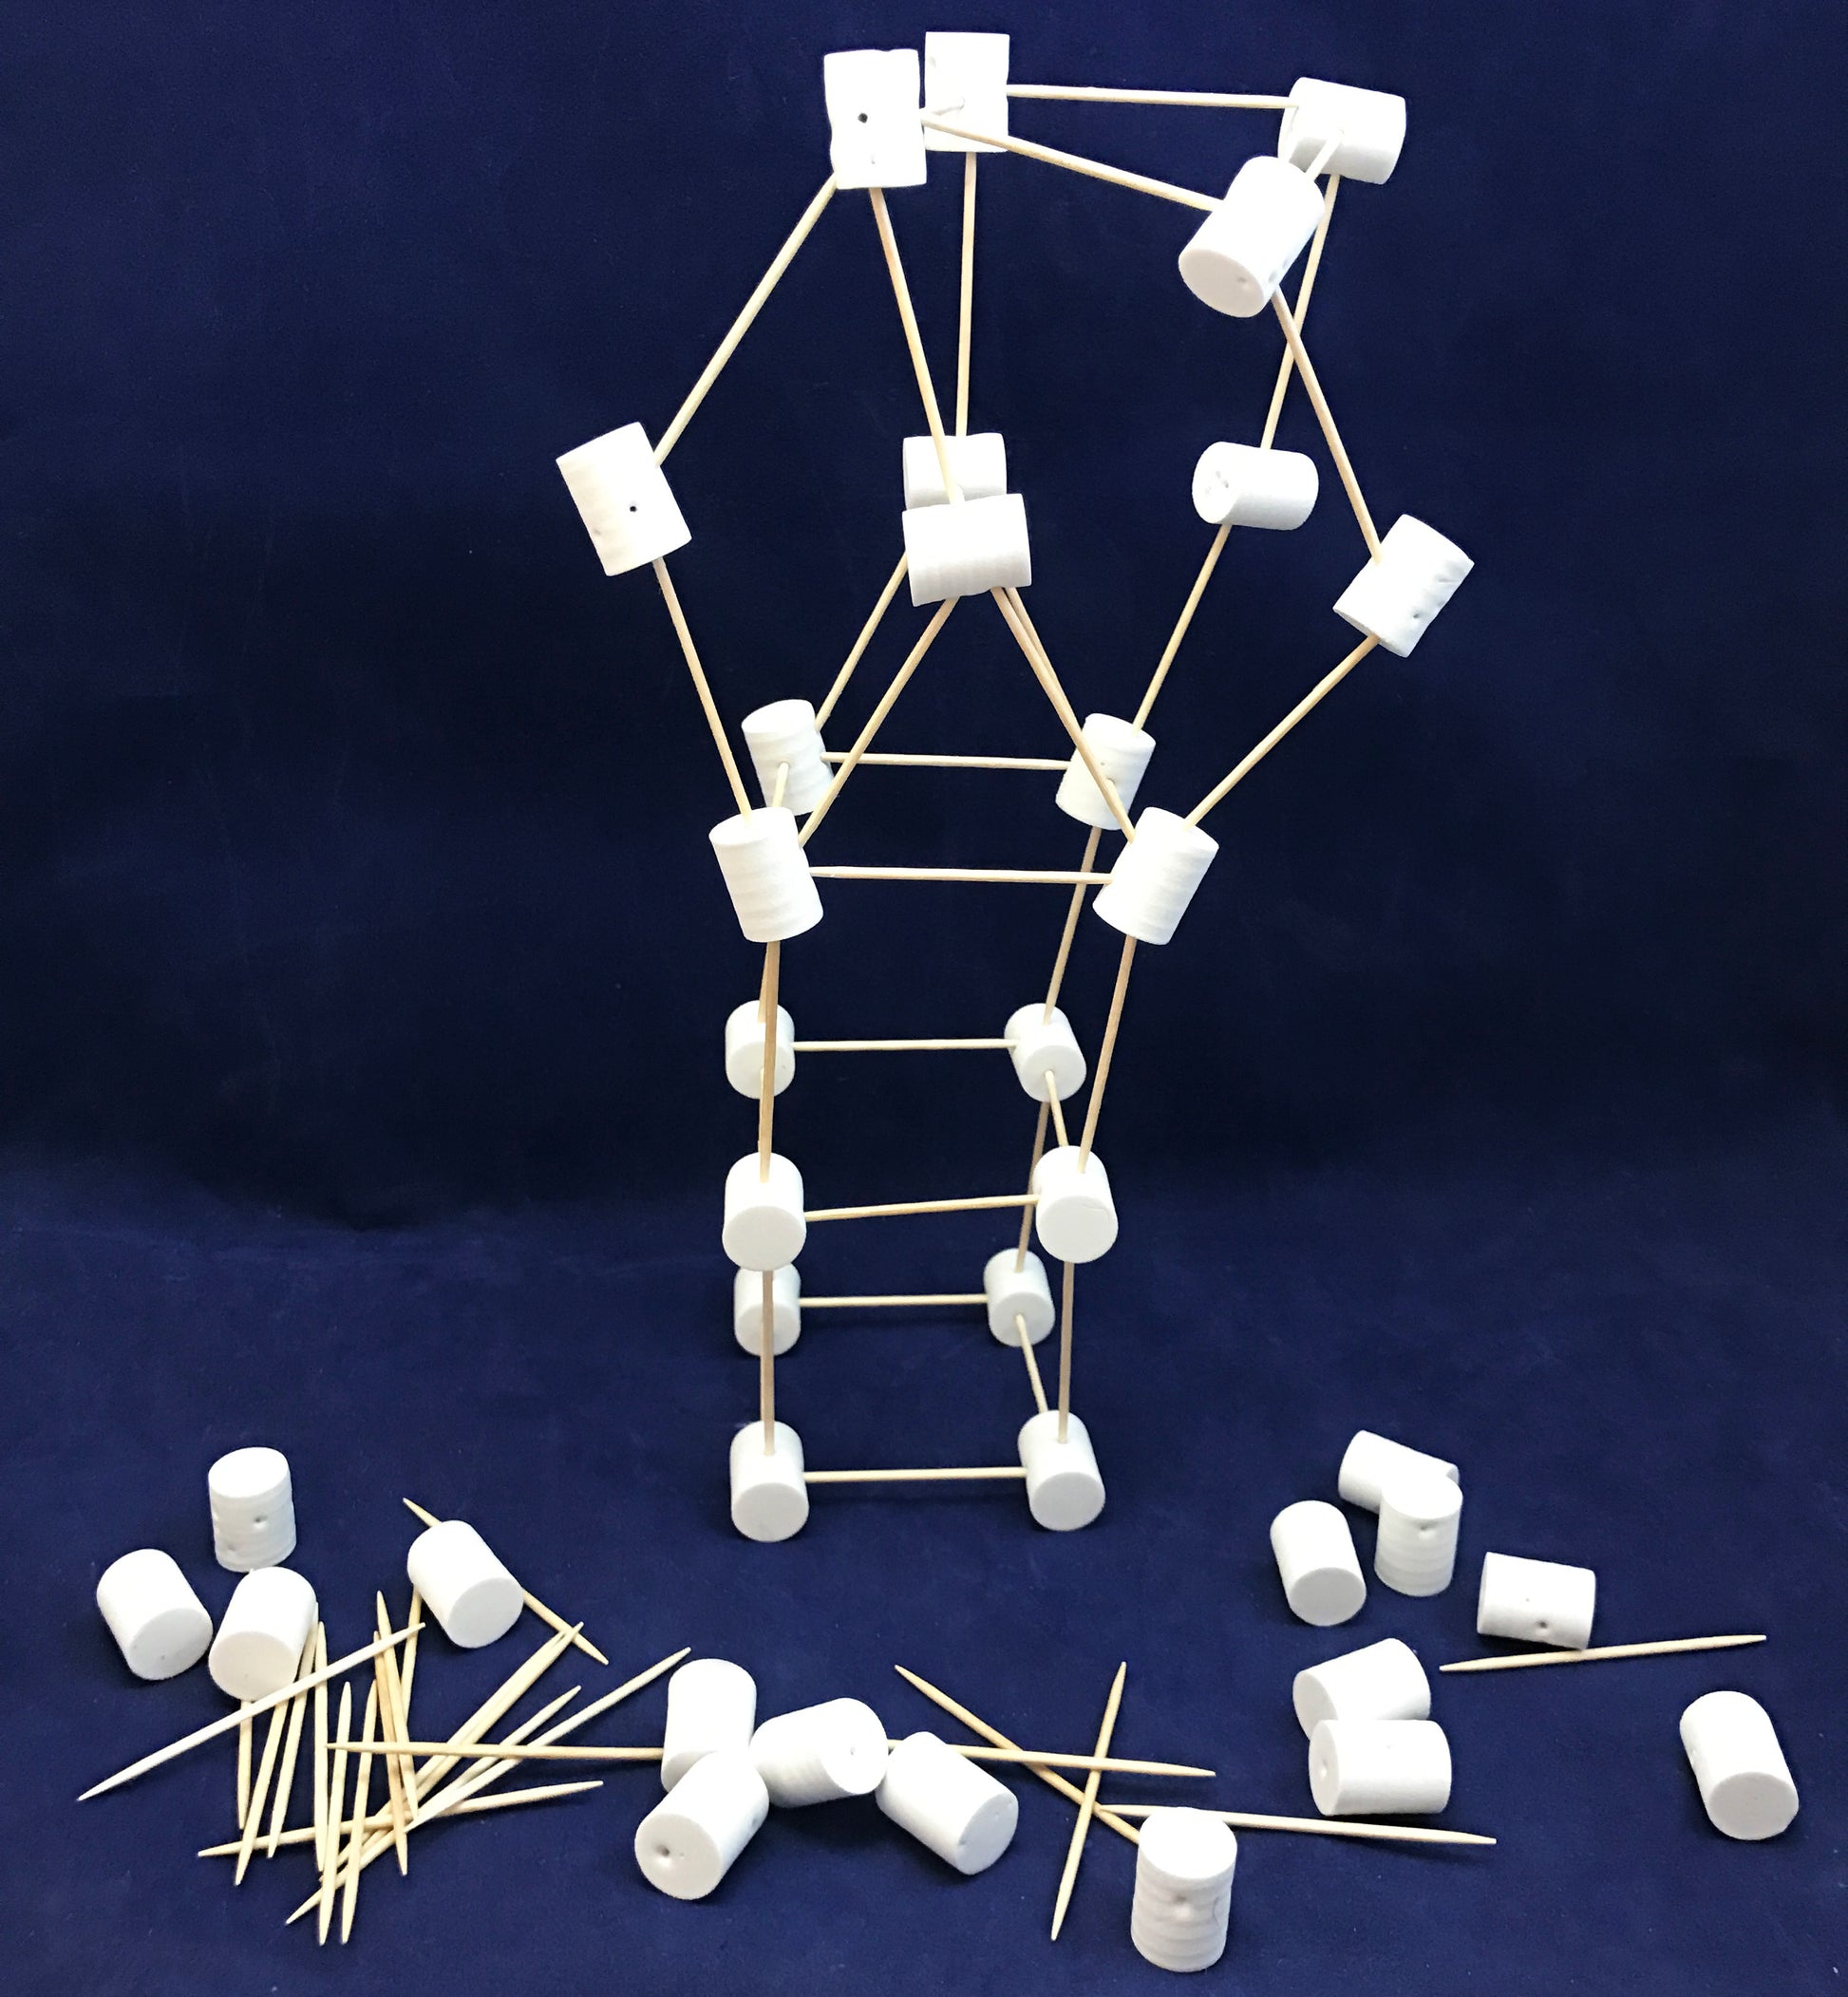 Structures and building with foam marshmallows